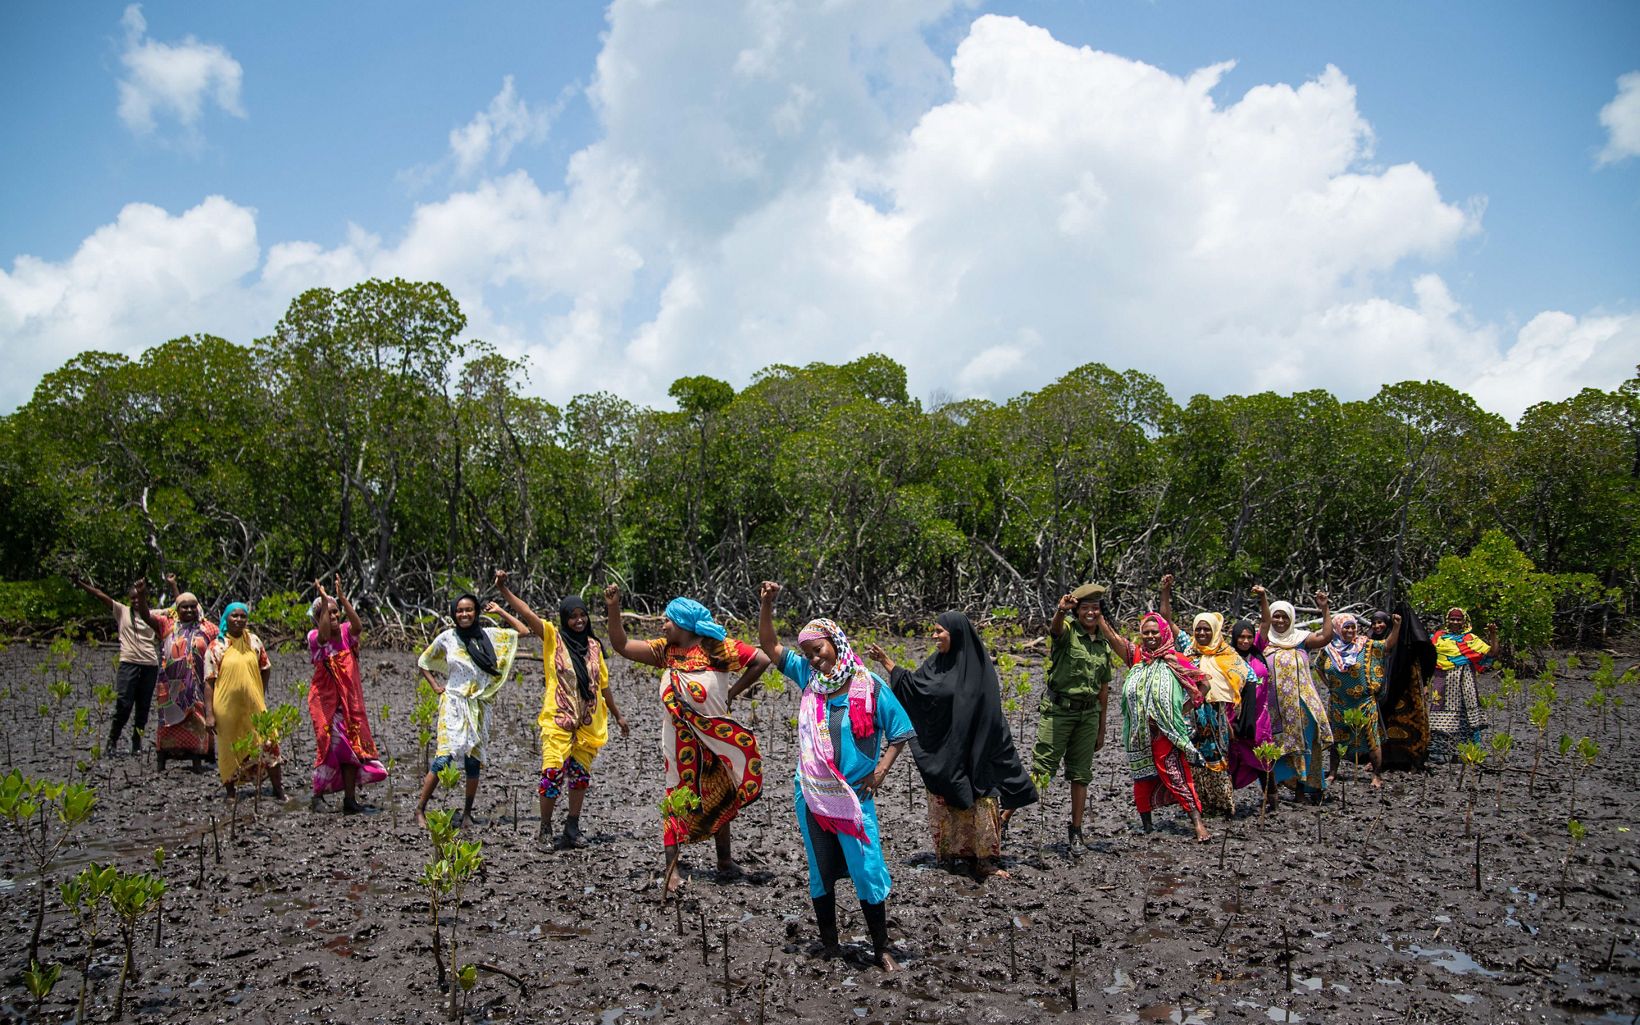 Zulfa Hassan (center, in blue), chairlady of the Mtangawanda Women's Association, and a group of women plant mangroves in a TNC-led mangrove restoration project.

